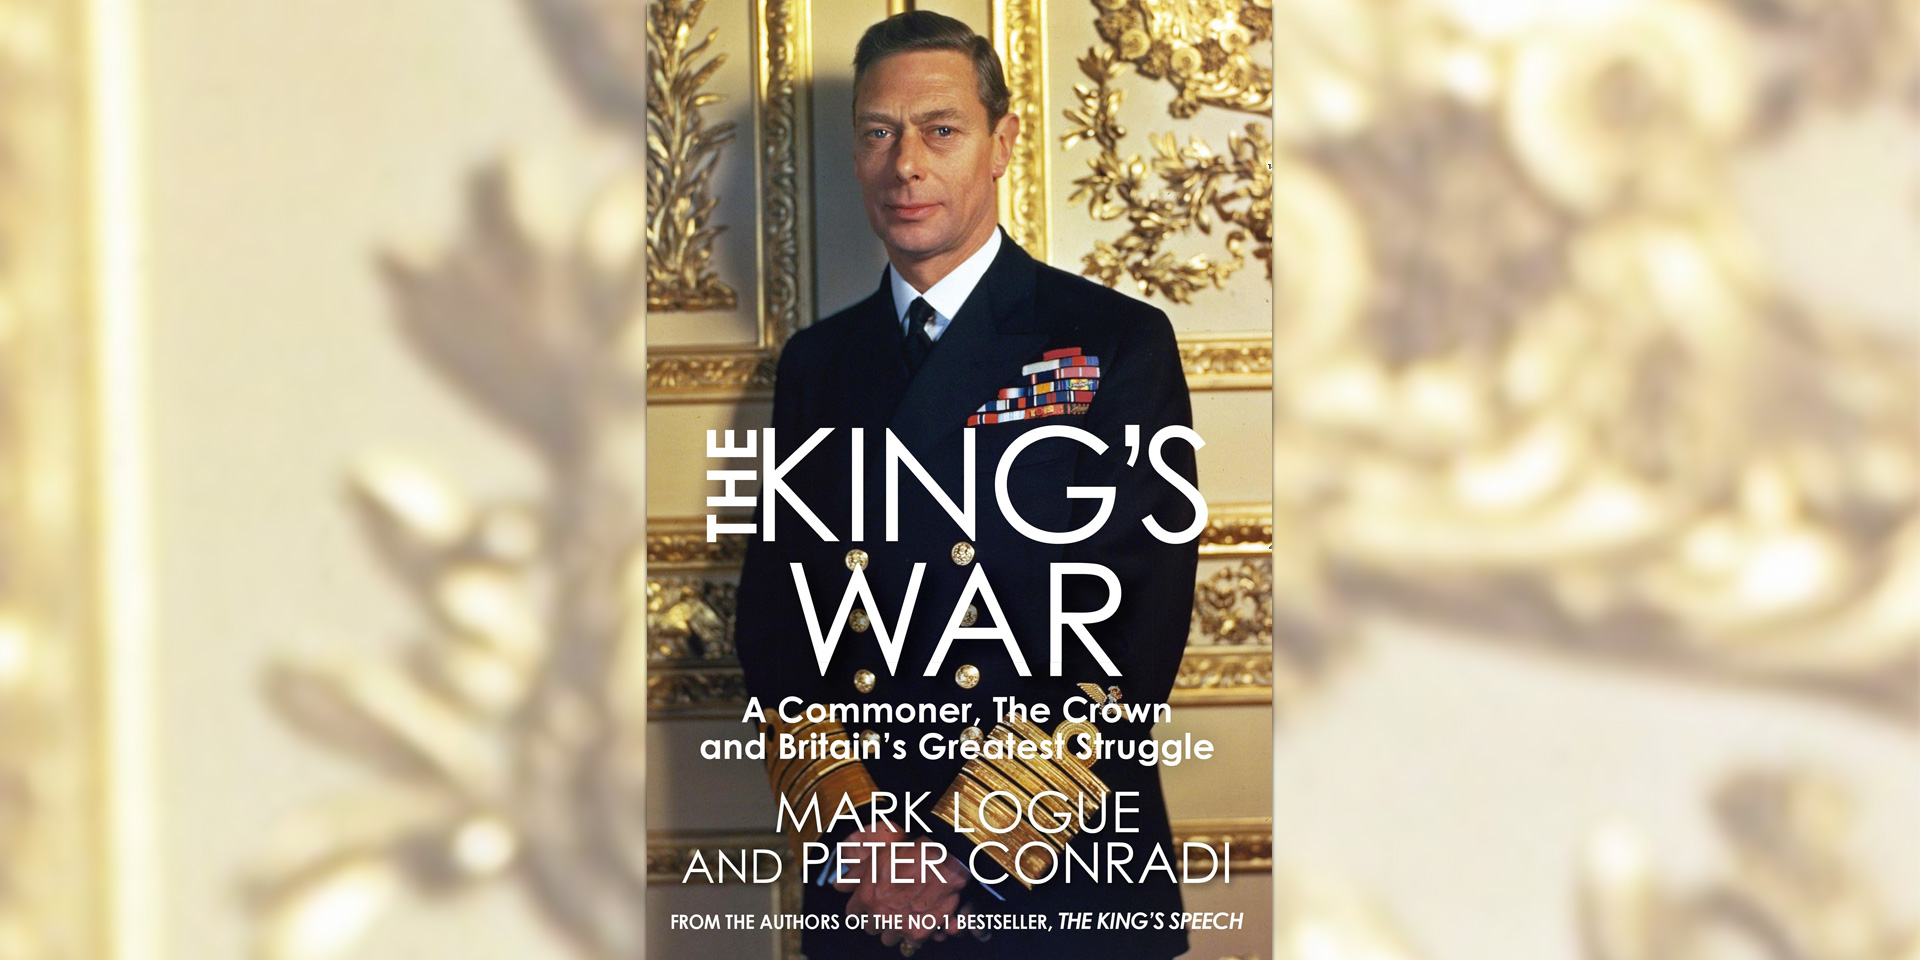 The King's War book cover